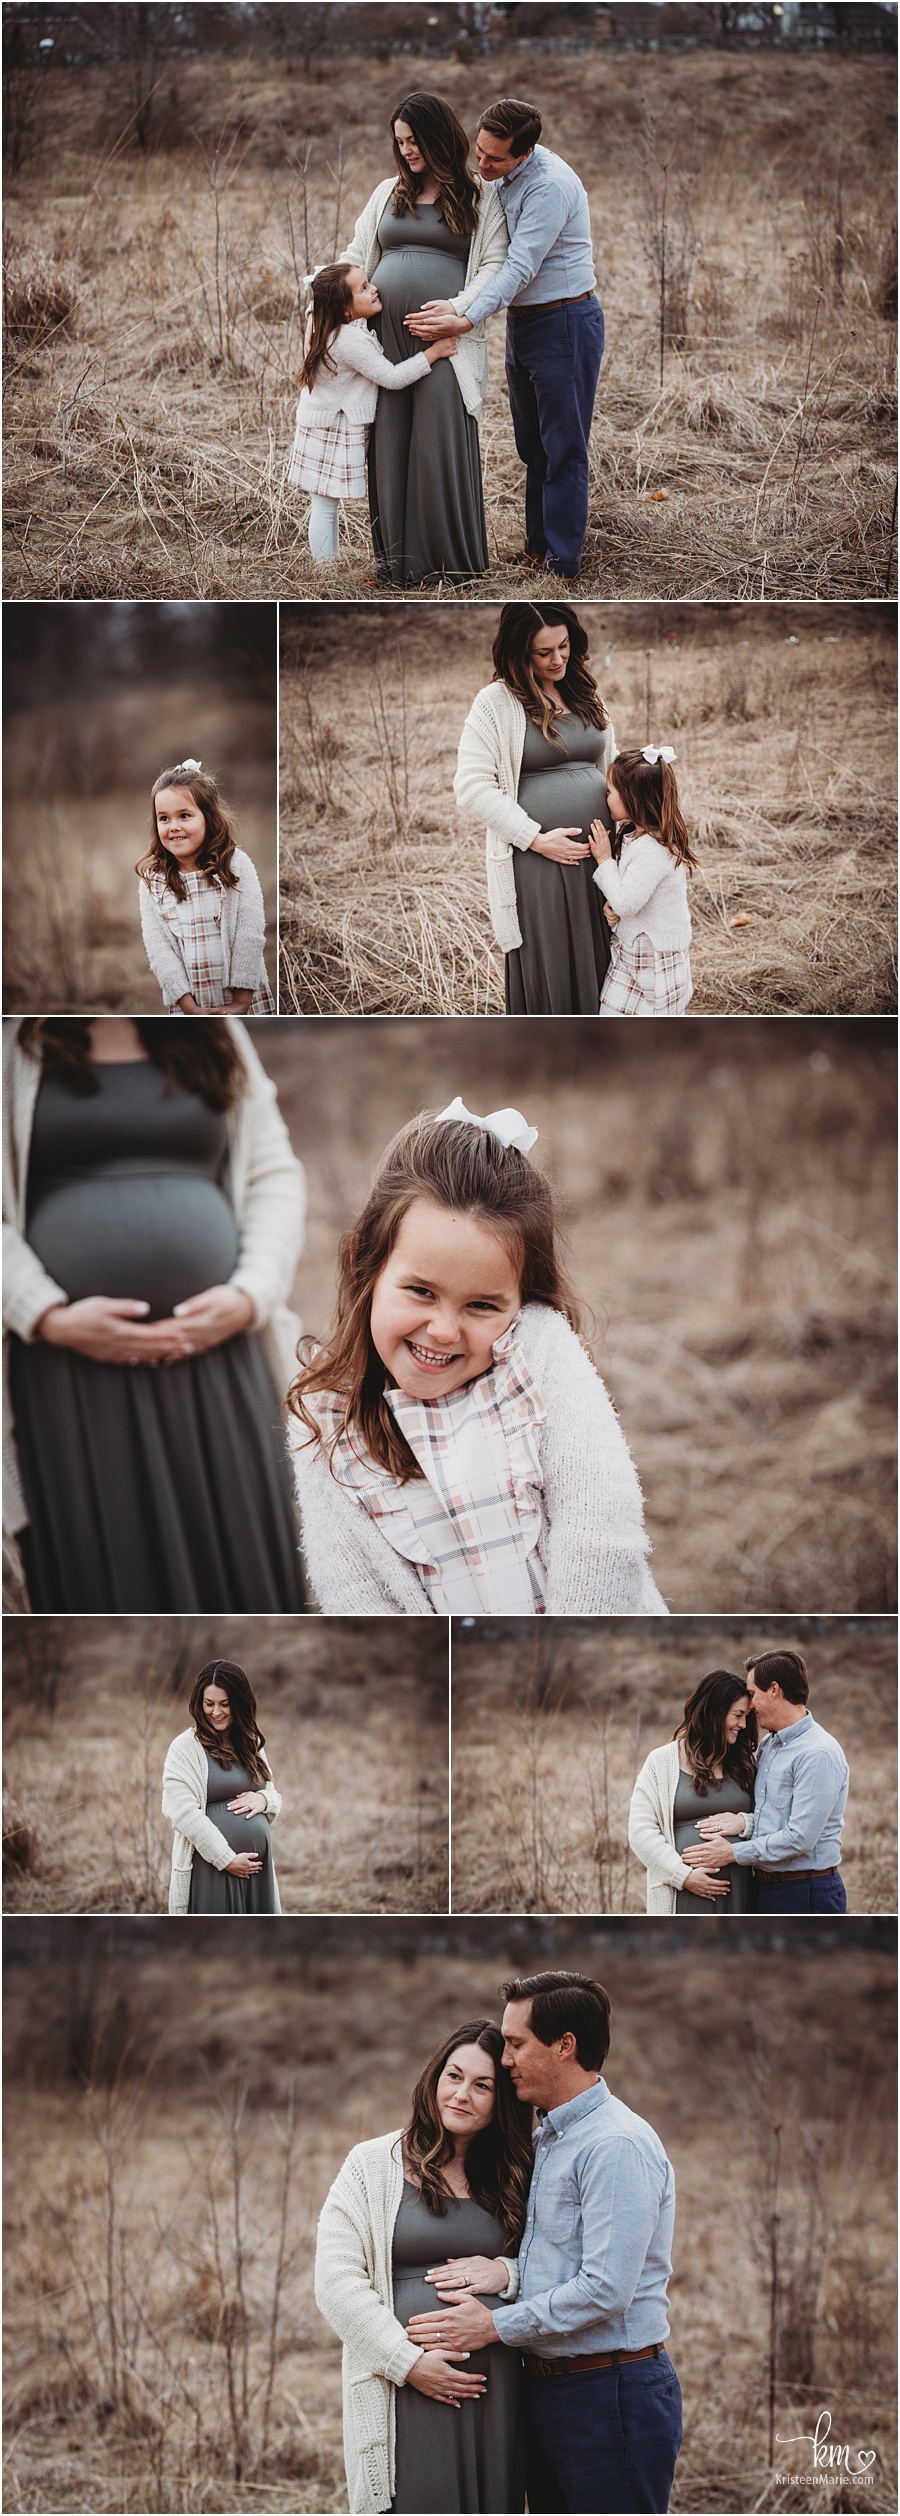 maternity photography in field